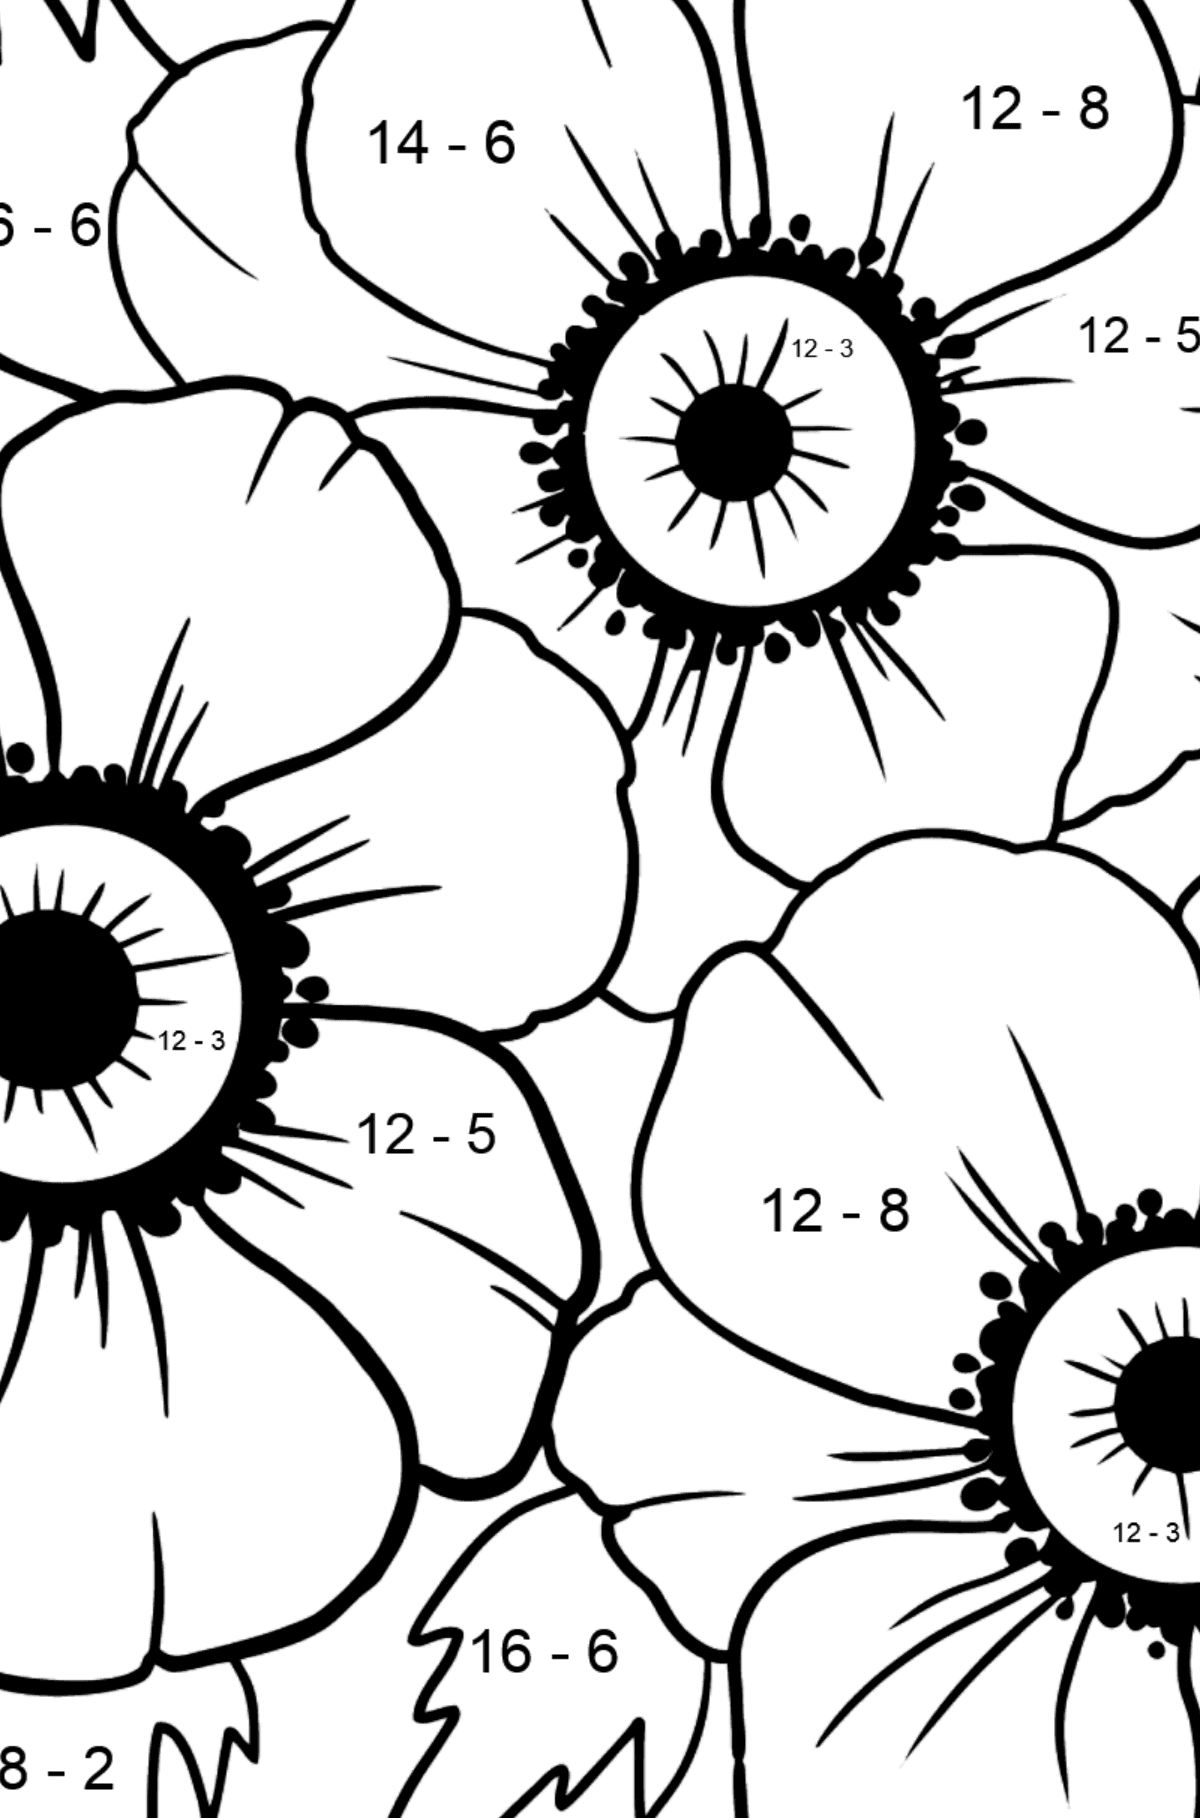 Coloring Page Anemone Mr. Fokker - Math Coloring - Subtraction for Kids